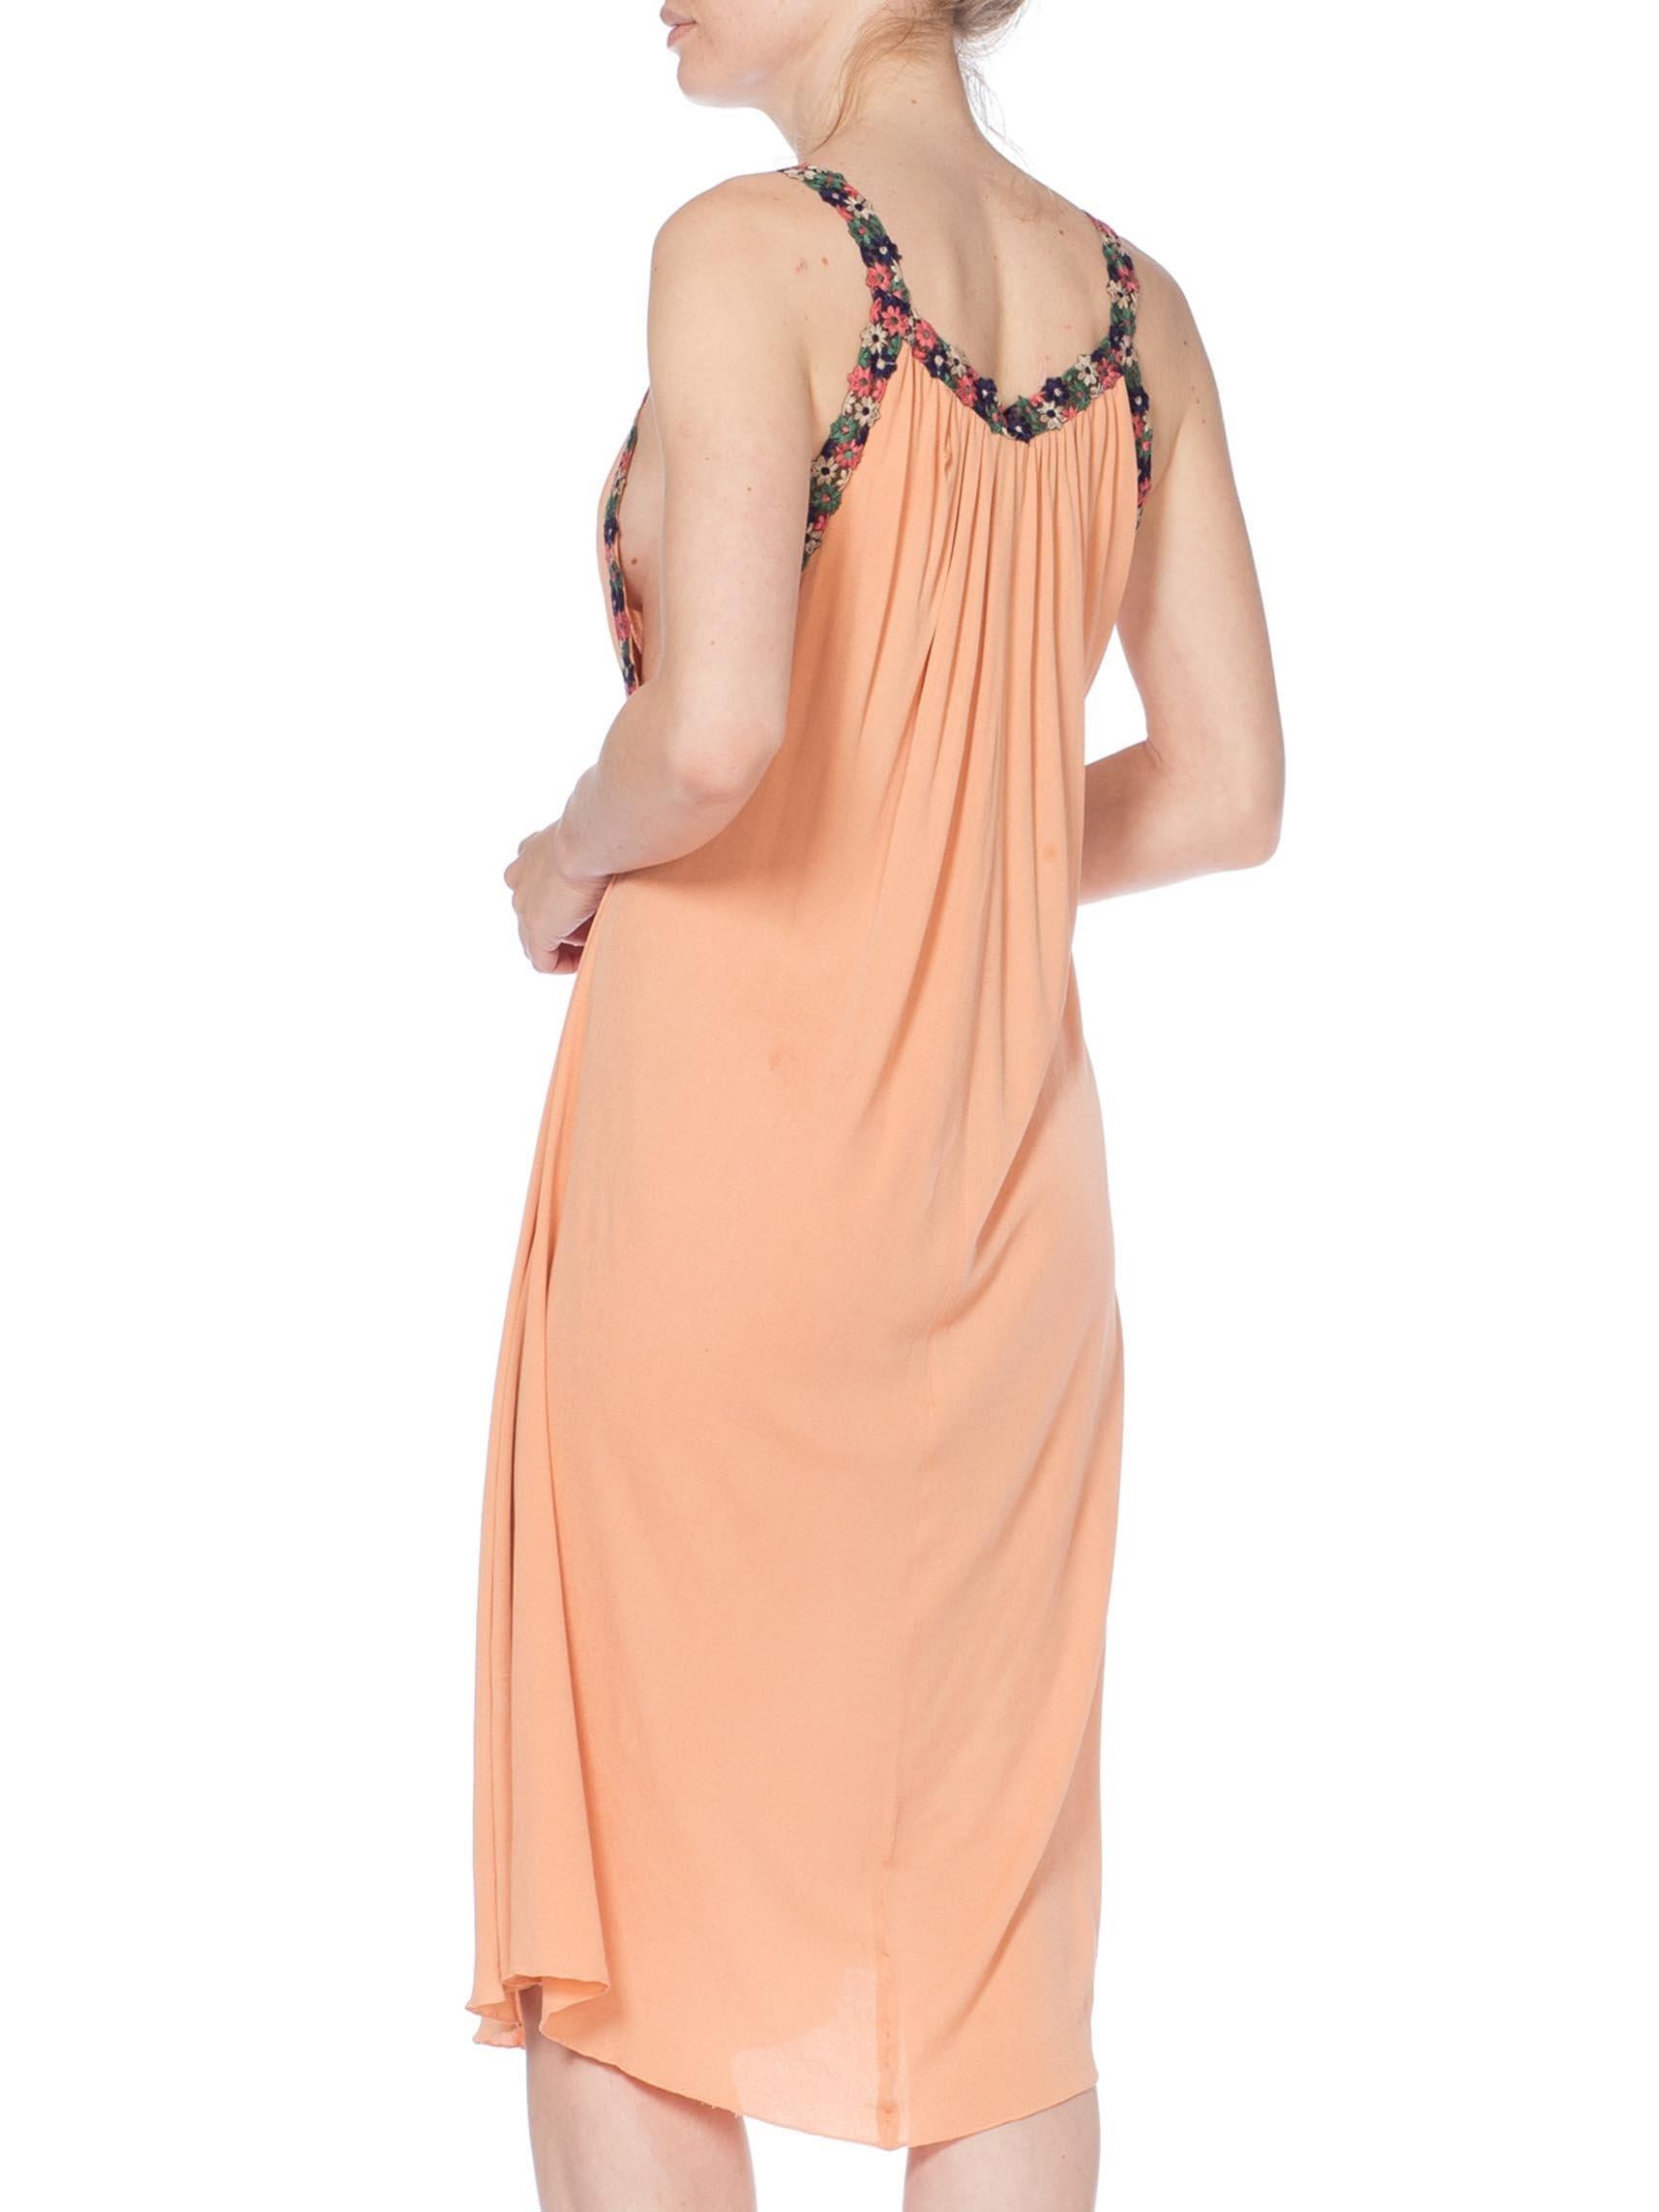 MORPHEW COLLECTION Peach Silk Jersey Dress With Cutout Front & 1930S Floral Trim For Sale 2